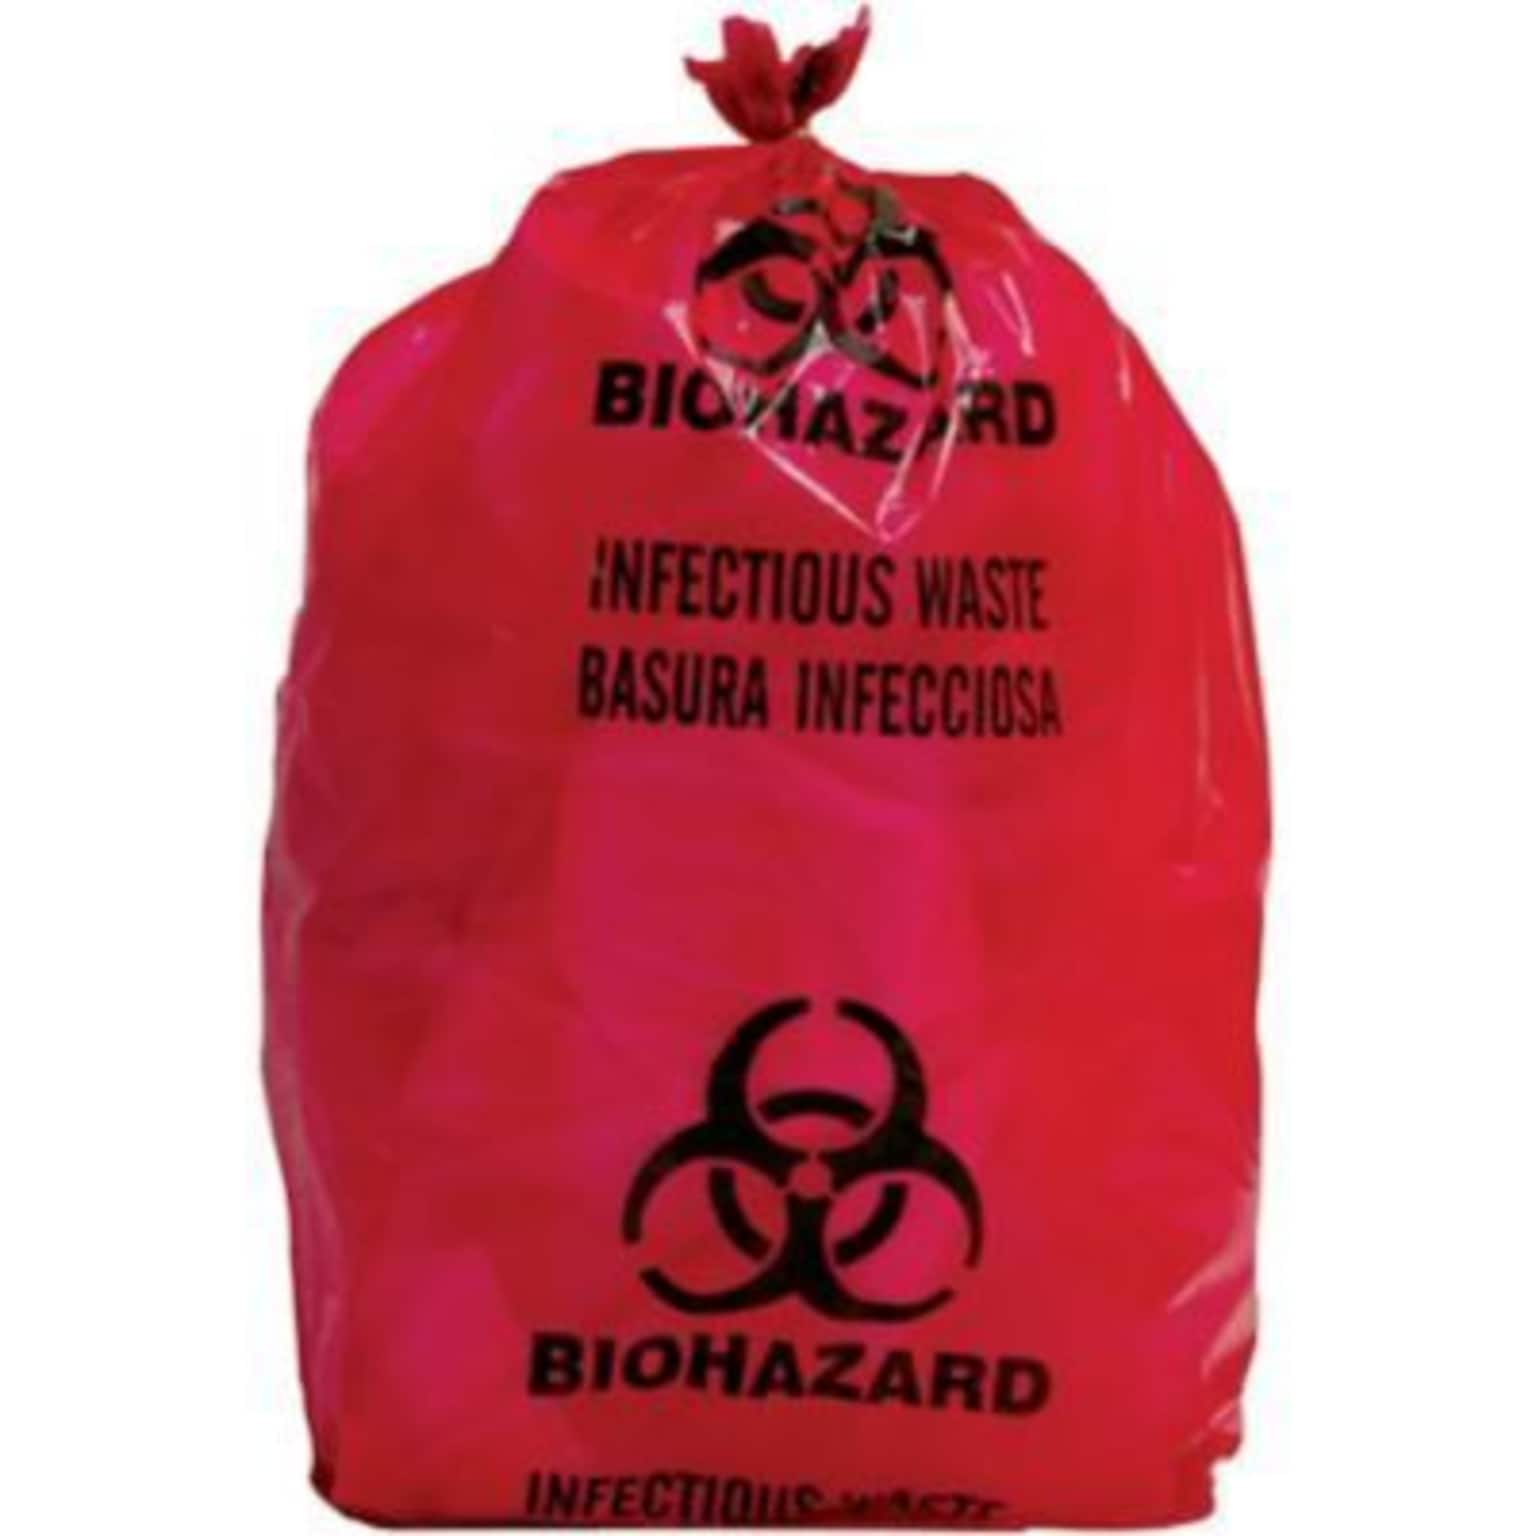 Biomedical Waste Disposal Systems; Infectious Waste Bags, 5-Gallon, 20 Bags/Roll  | Quill.com